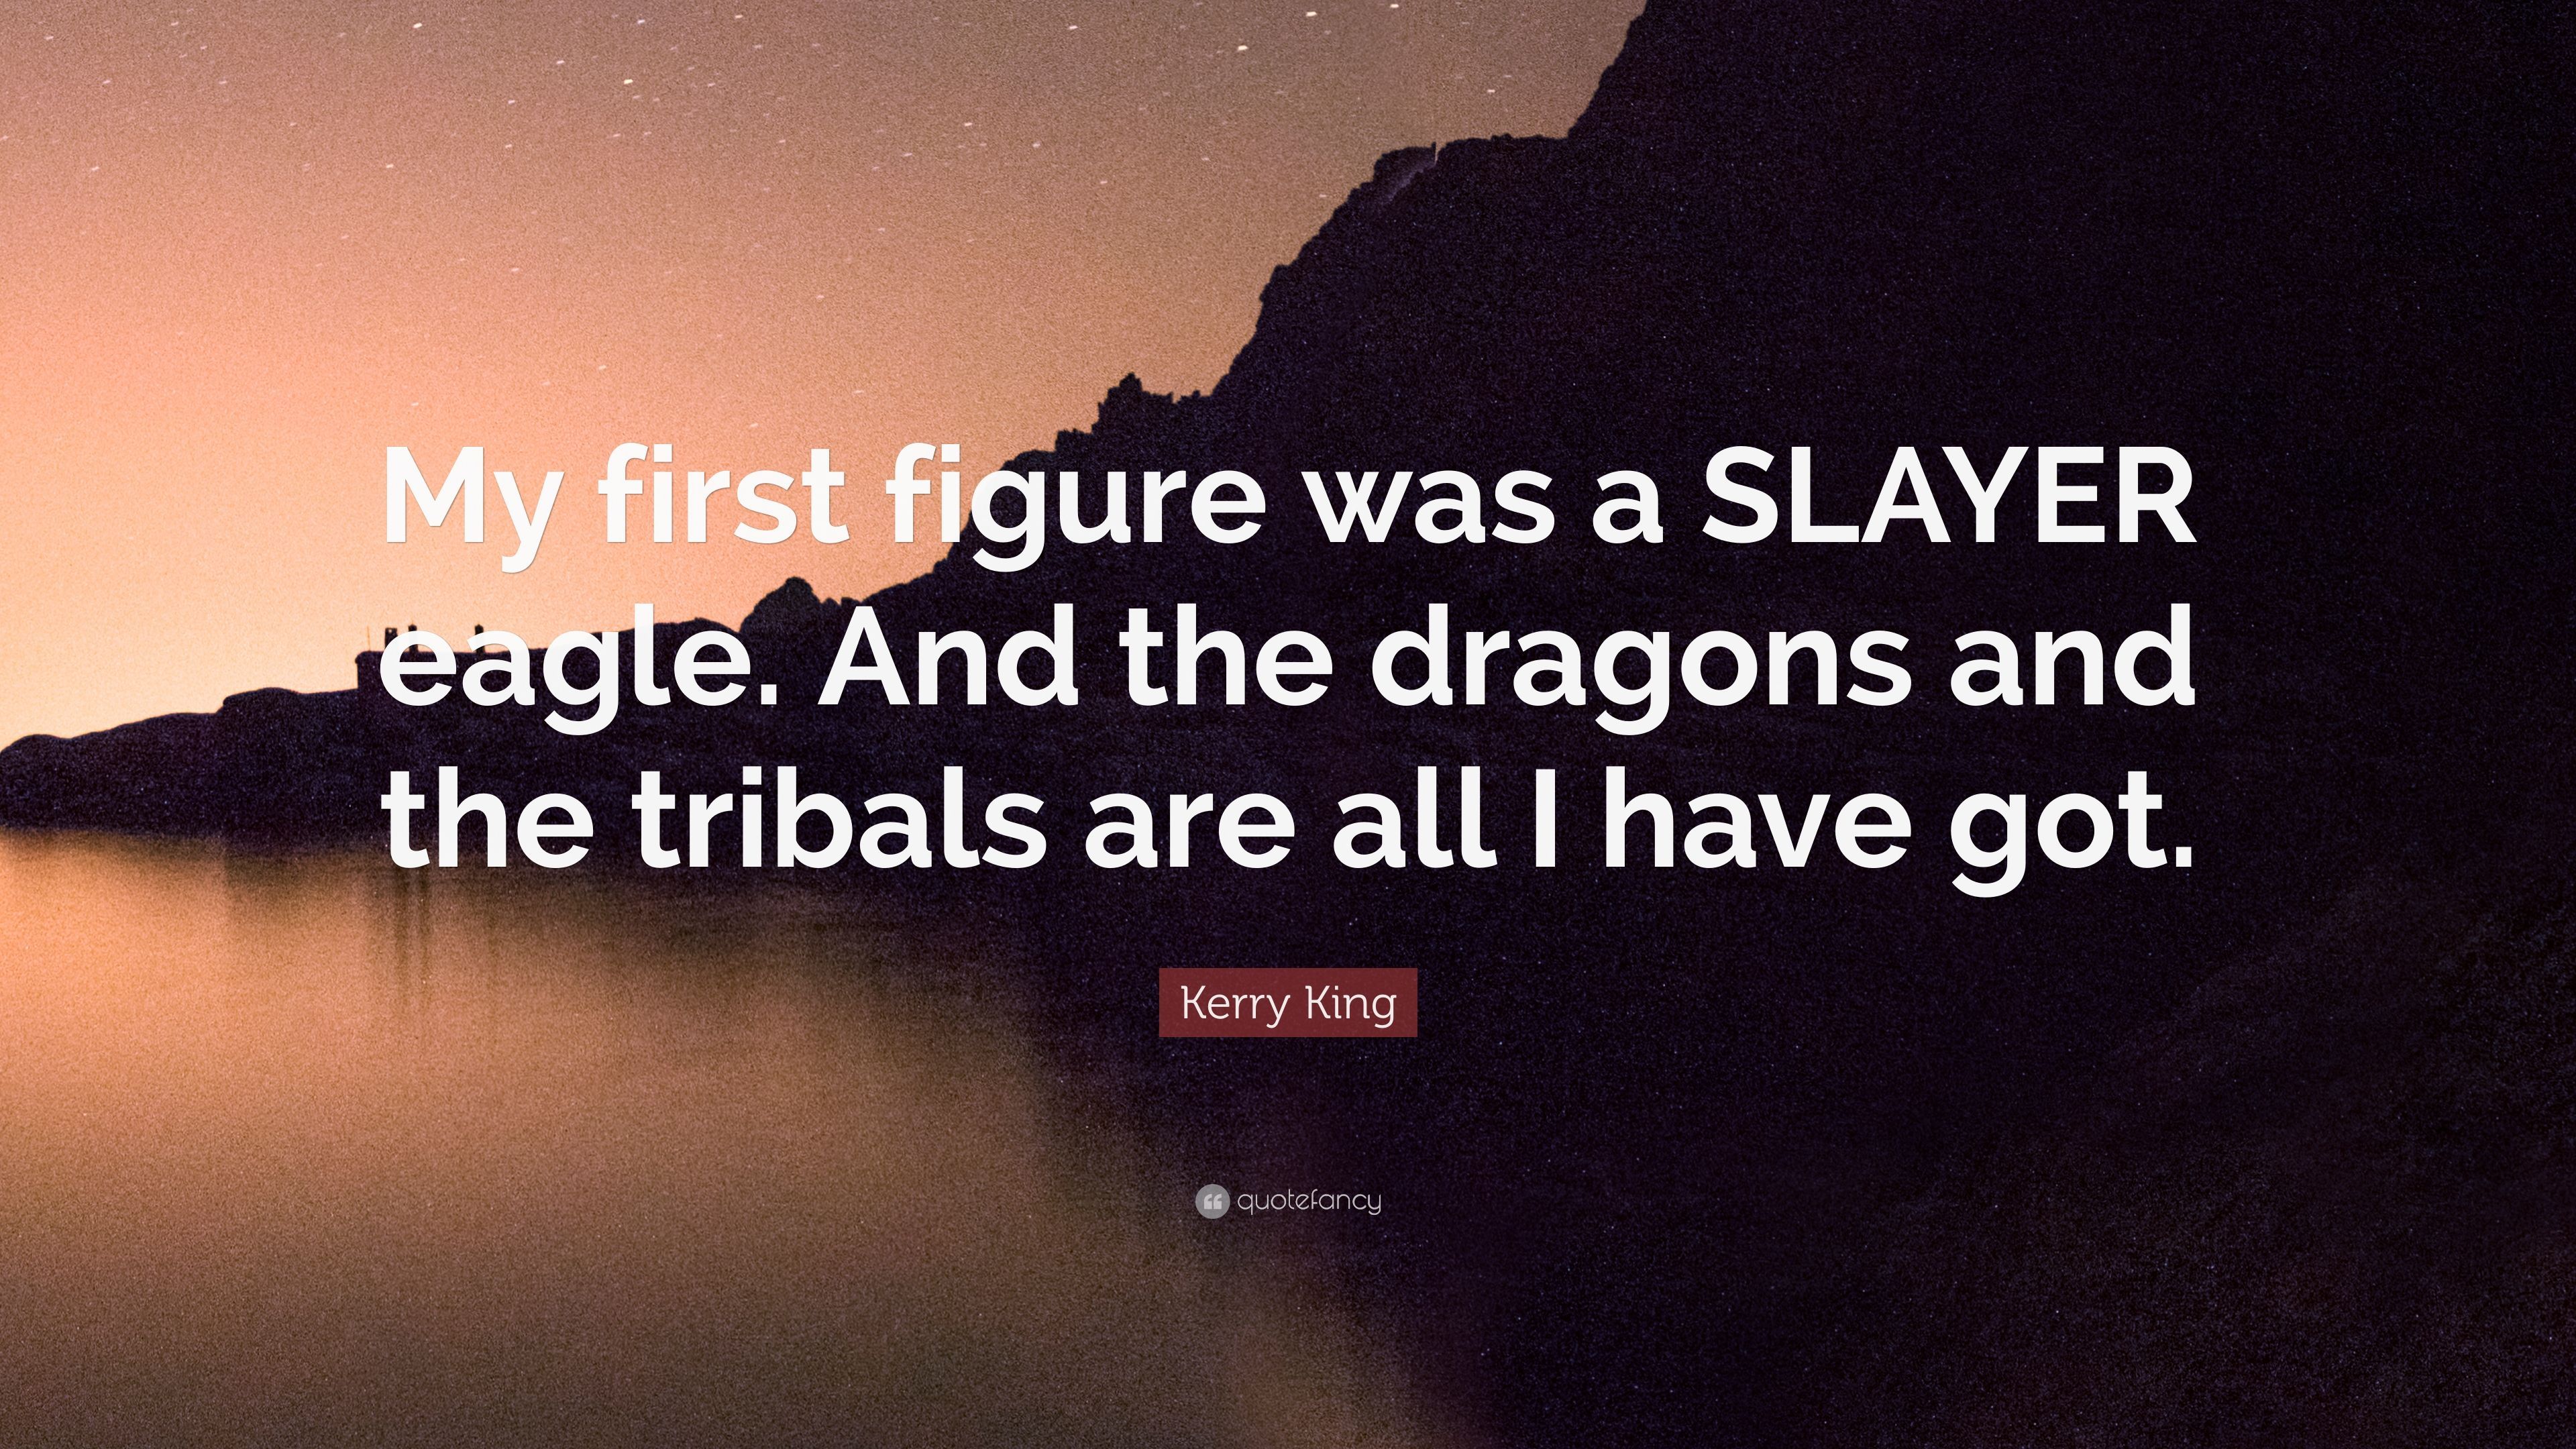 Kerry King Quote: “My first figure was a SLAYER eagle. And the dragons and the tribals are all I have got.” (7 wallpaper)